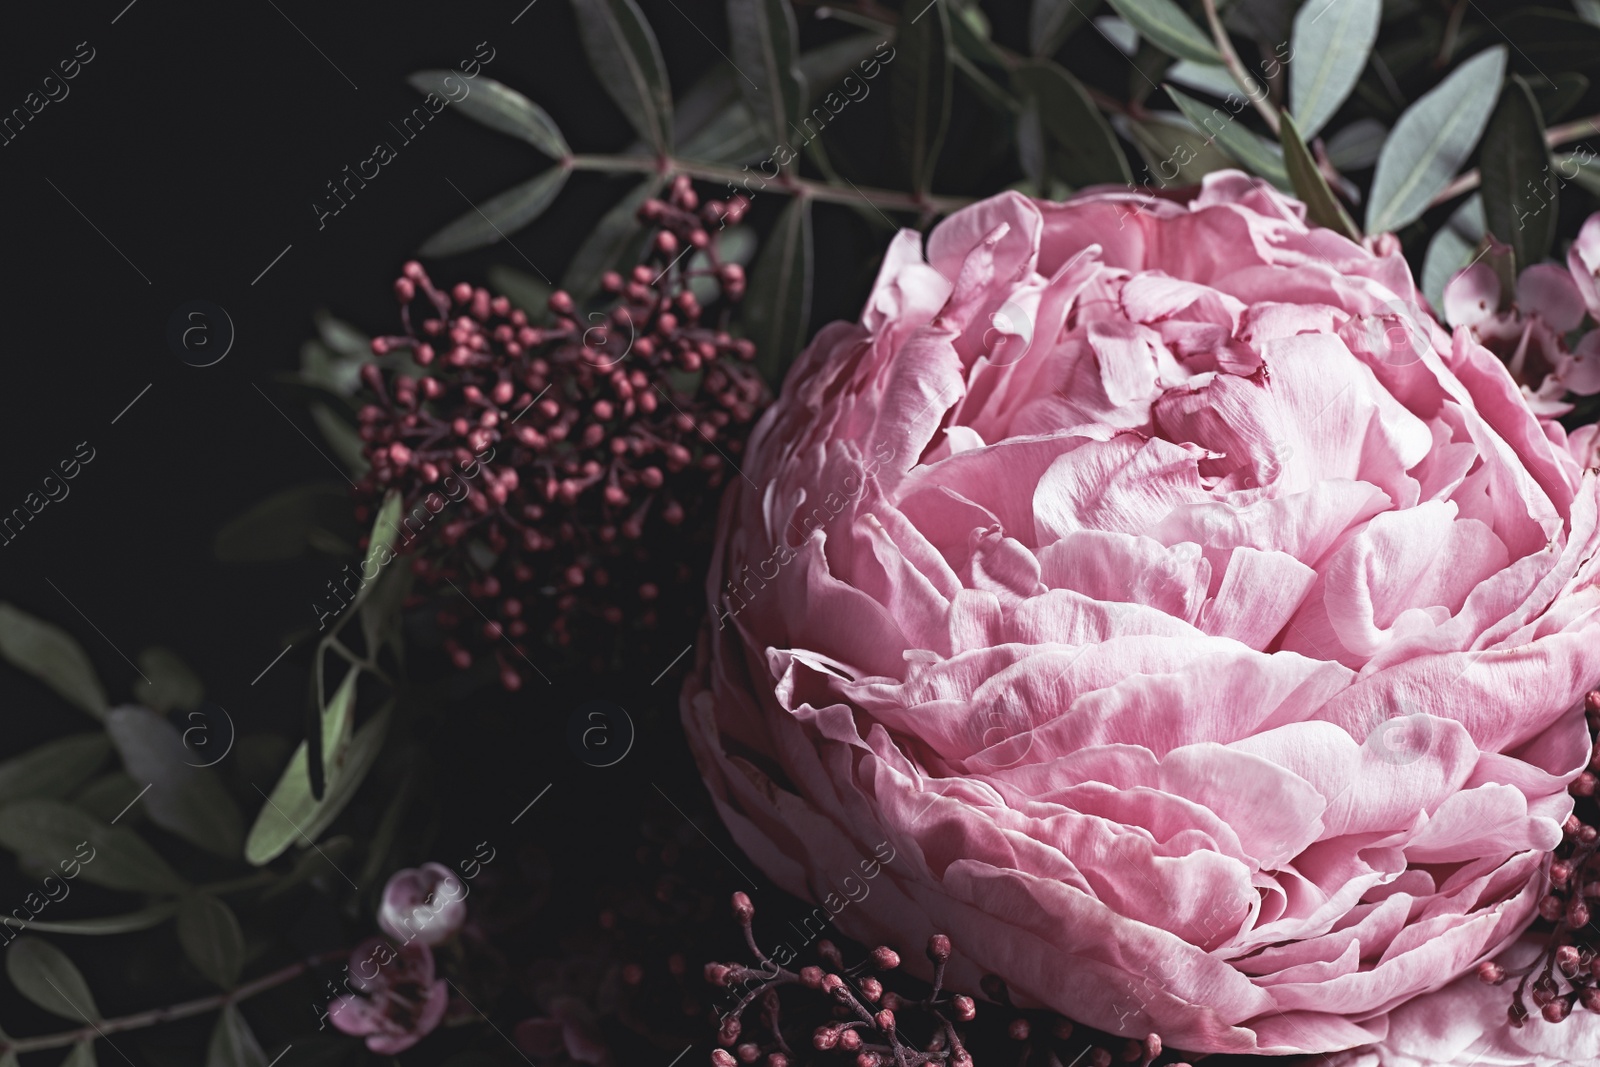 Photo of Bouquet of beautiful flowers on black background, closeup. Floral card design with dark vintage effect